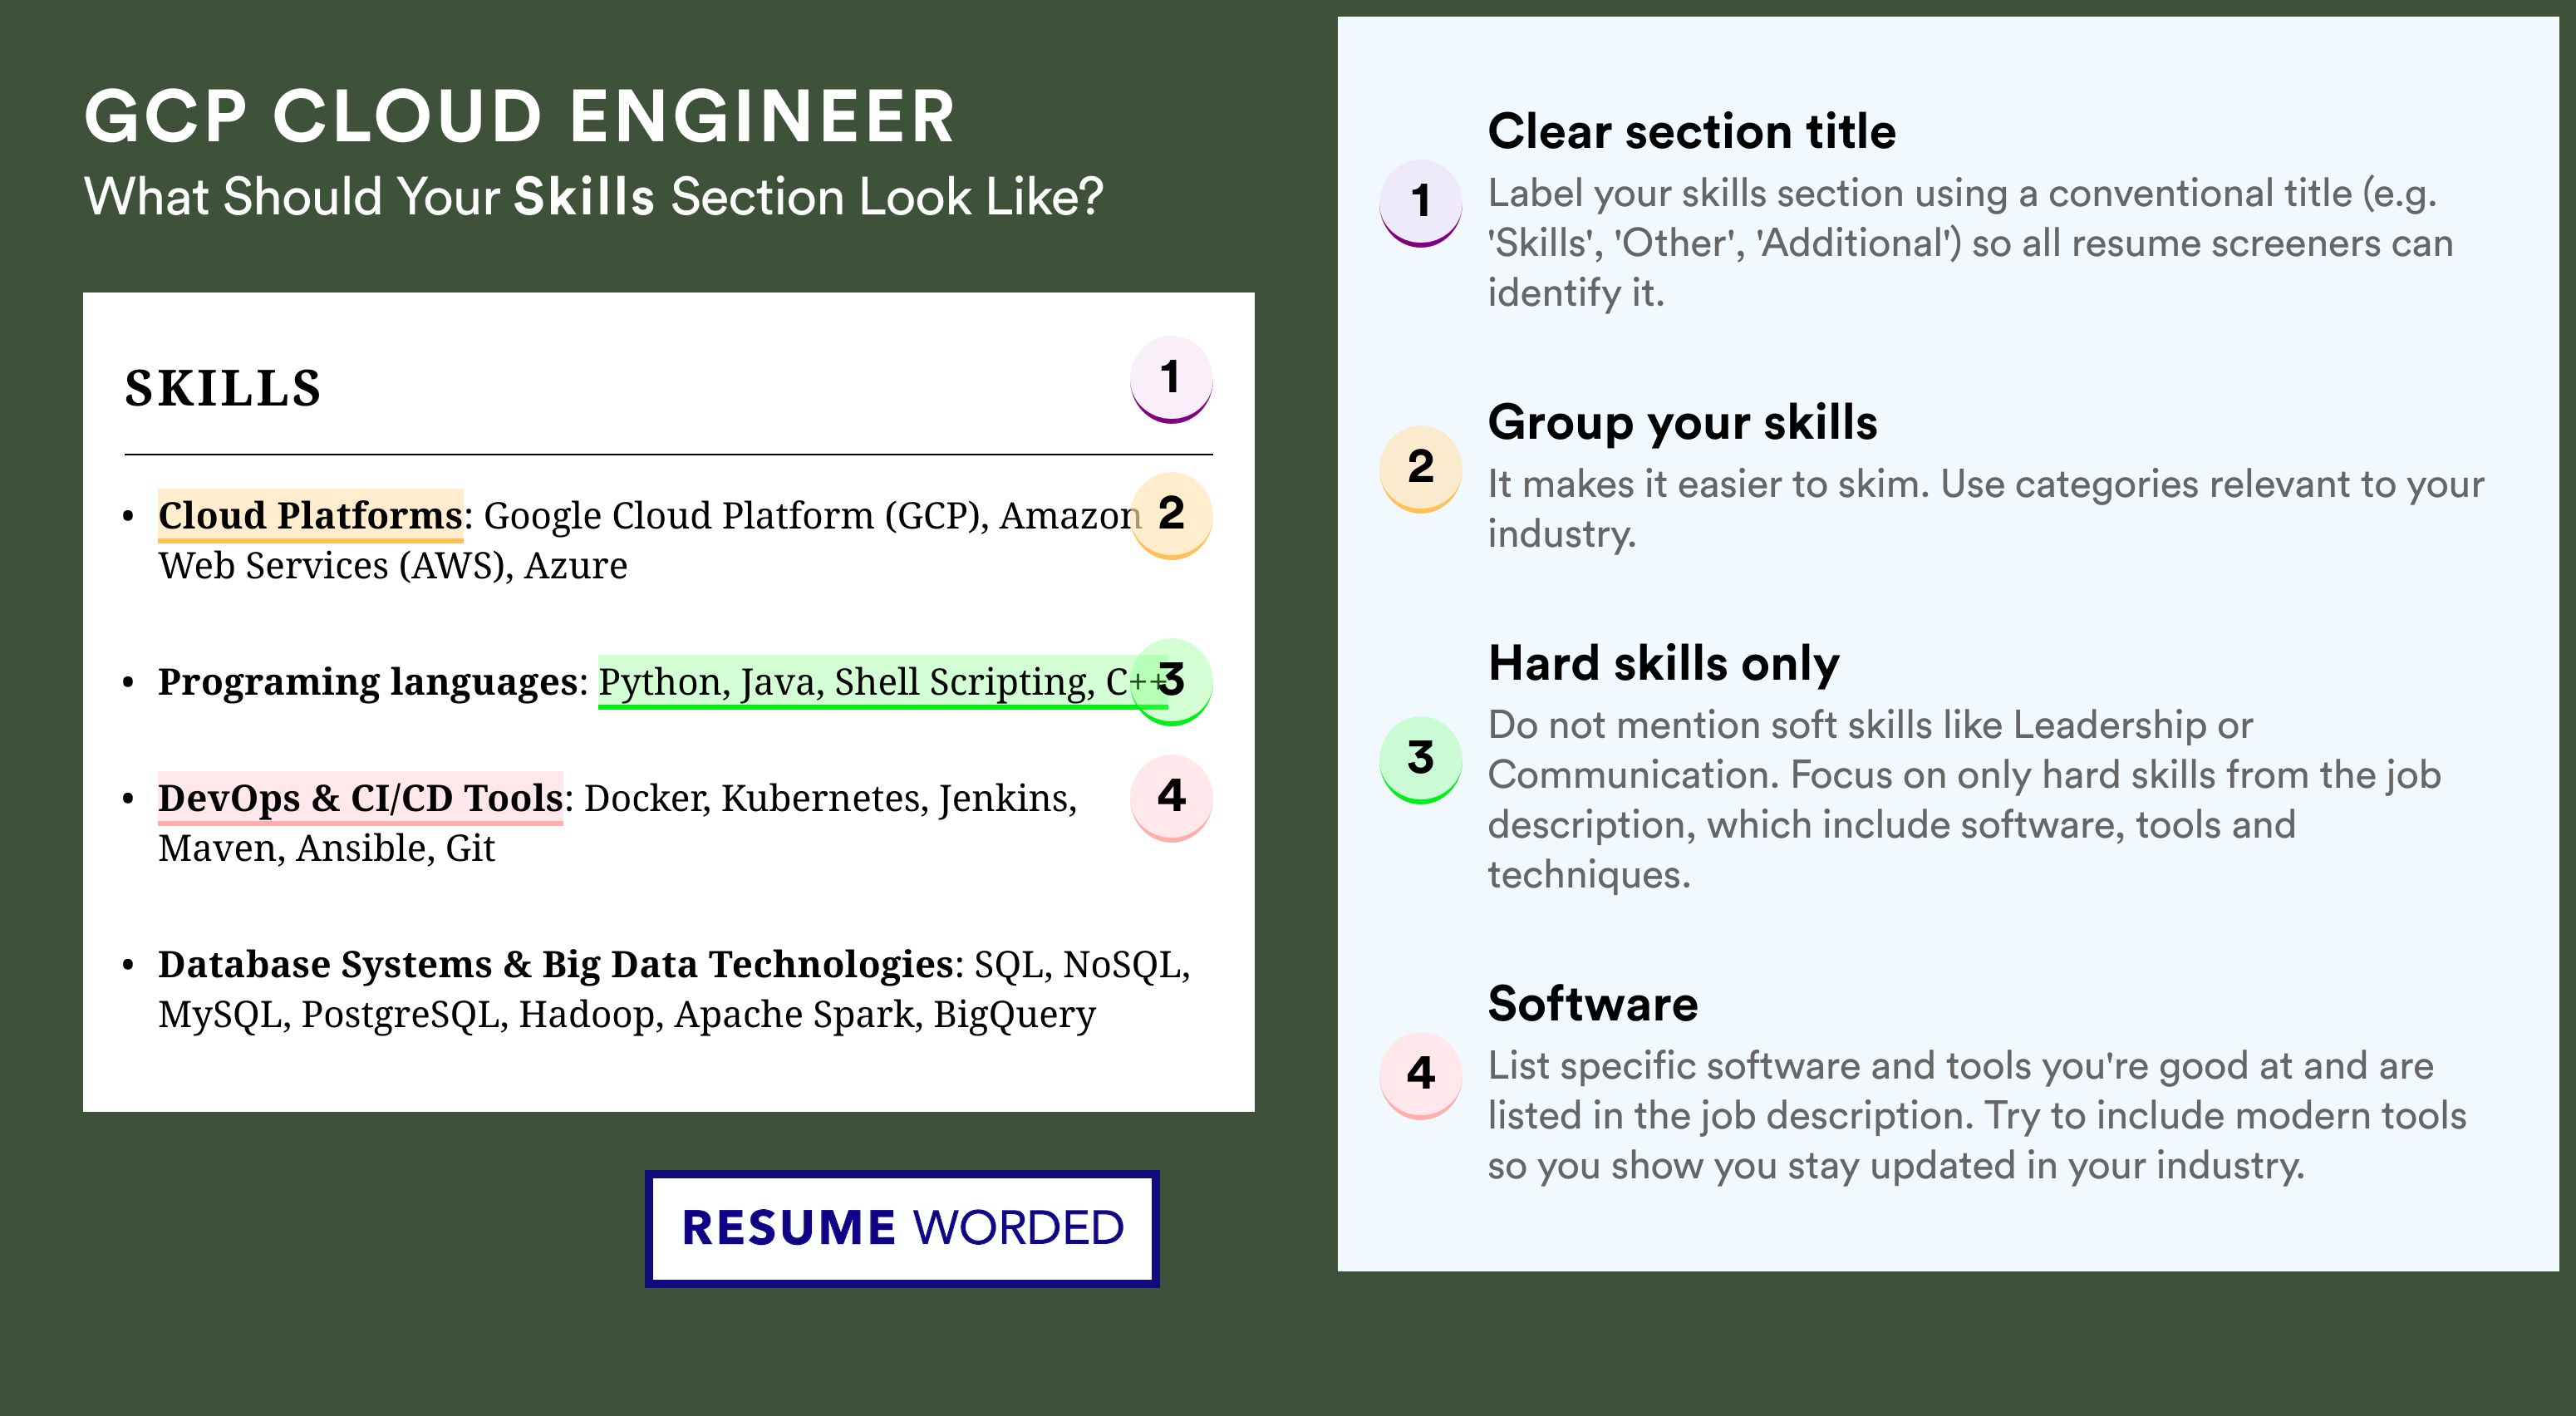 How To Write Your Skills Section - GCP Cloud Engineer Roles